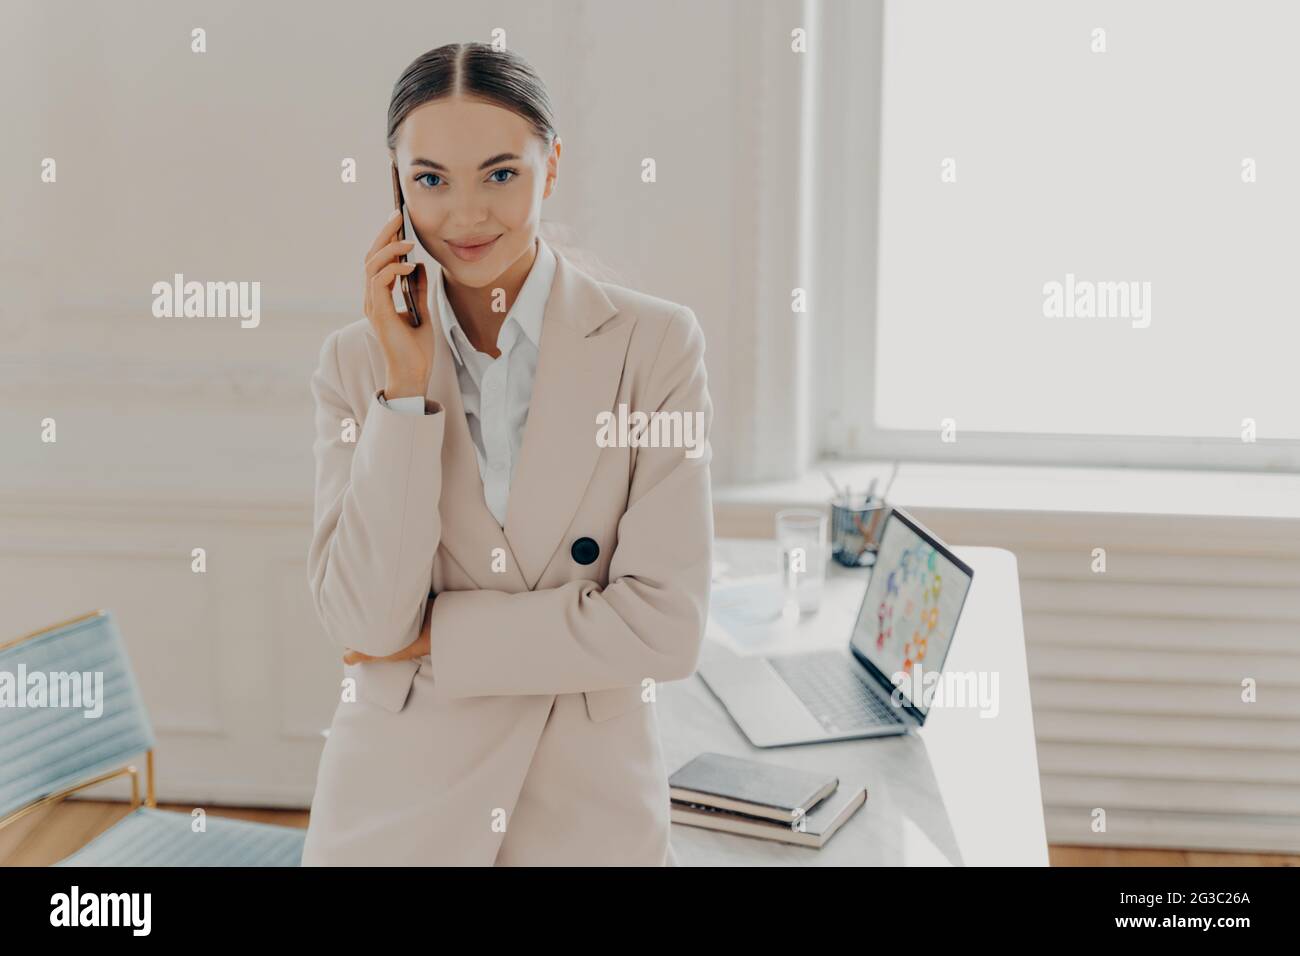 Positive young female entrepreneur talking on phone and smiling at camera Stock Photo